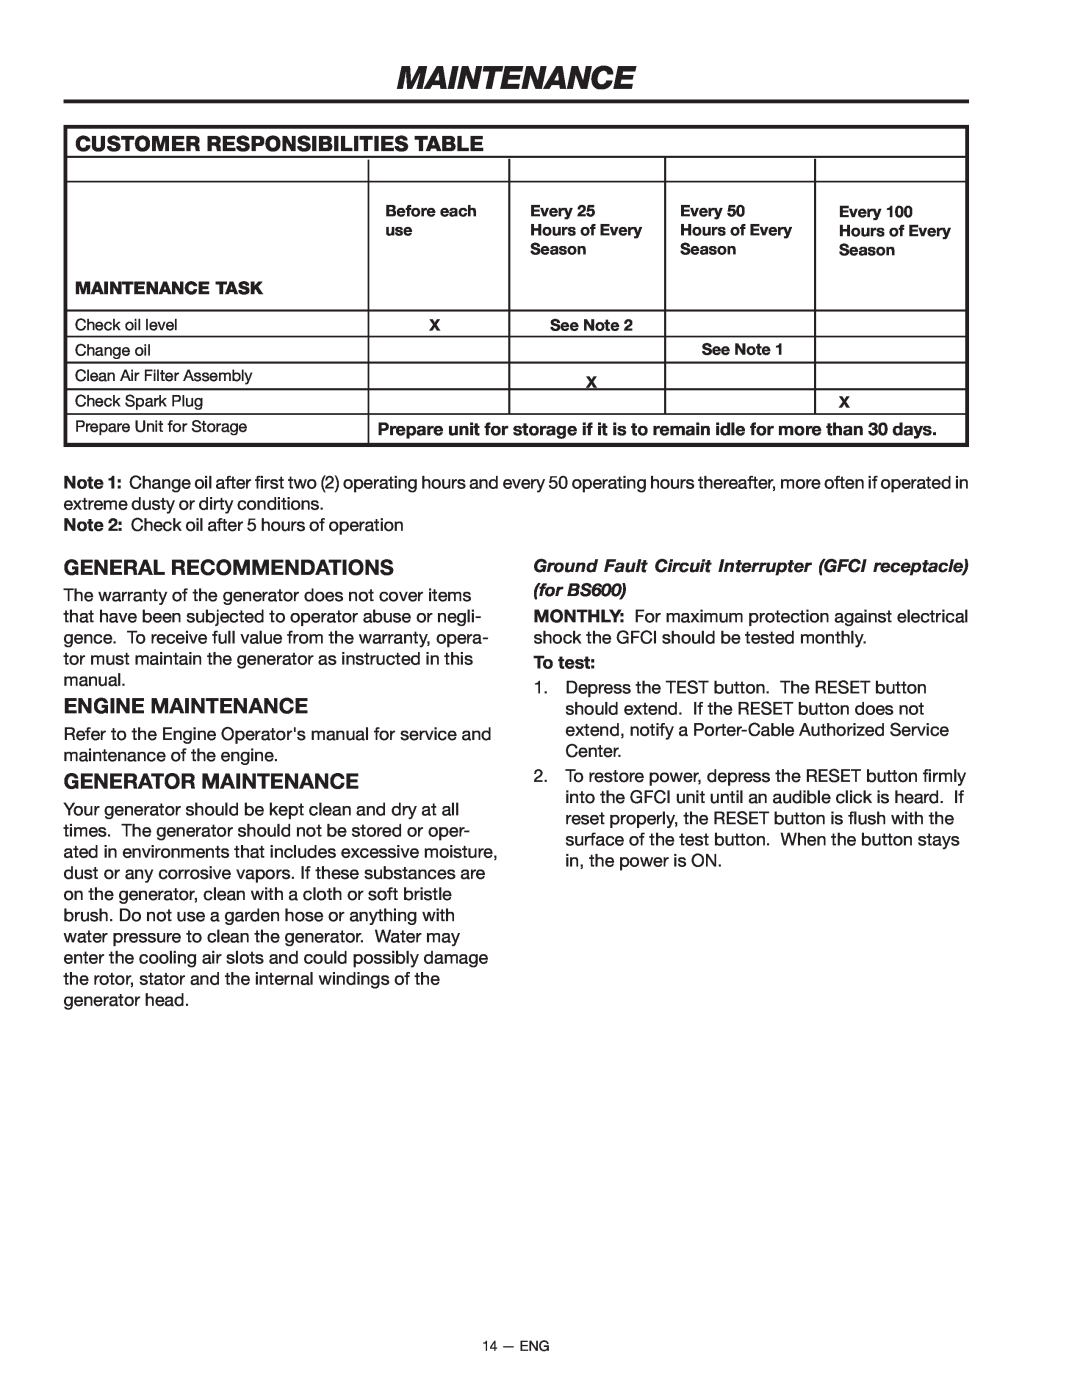 Porter-Cable BS600 Customer Responsibilities Table, General Recommendations, Engine Maintenance, Generator Maintenance 